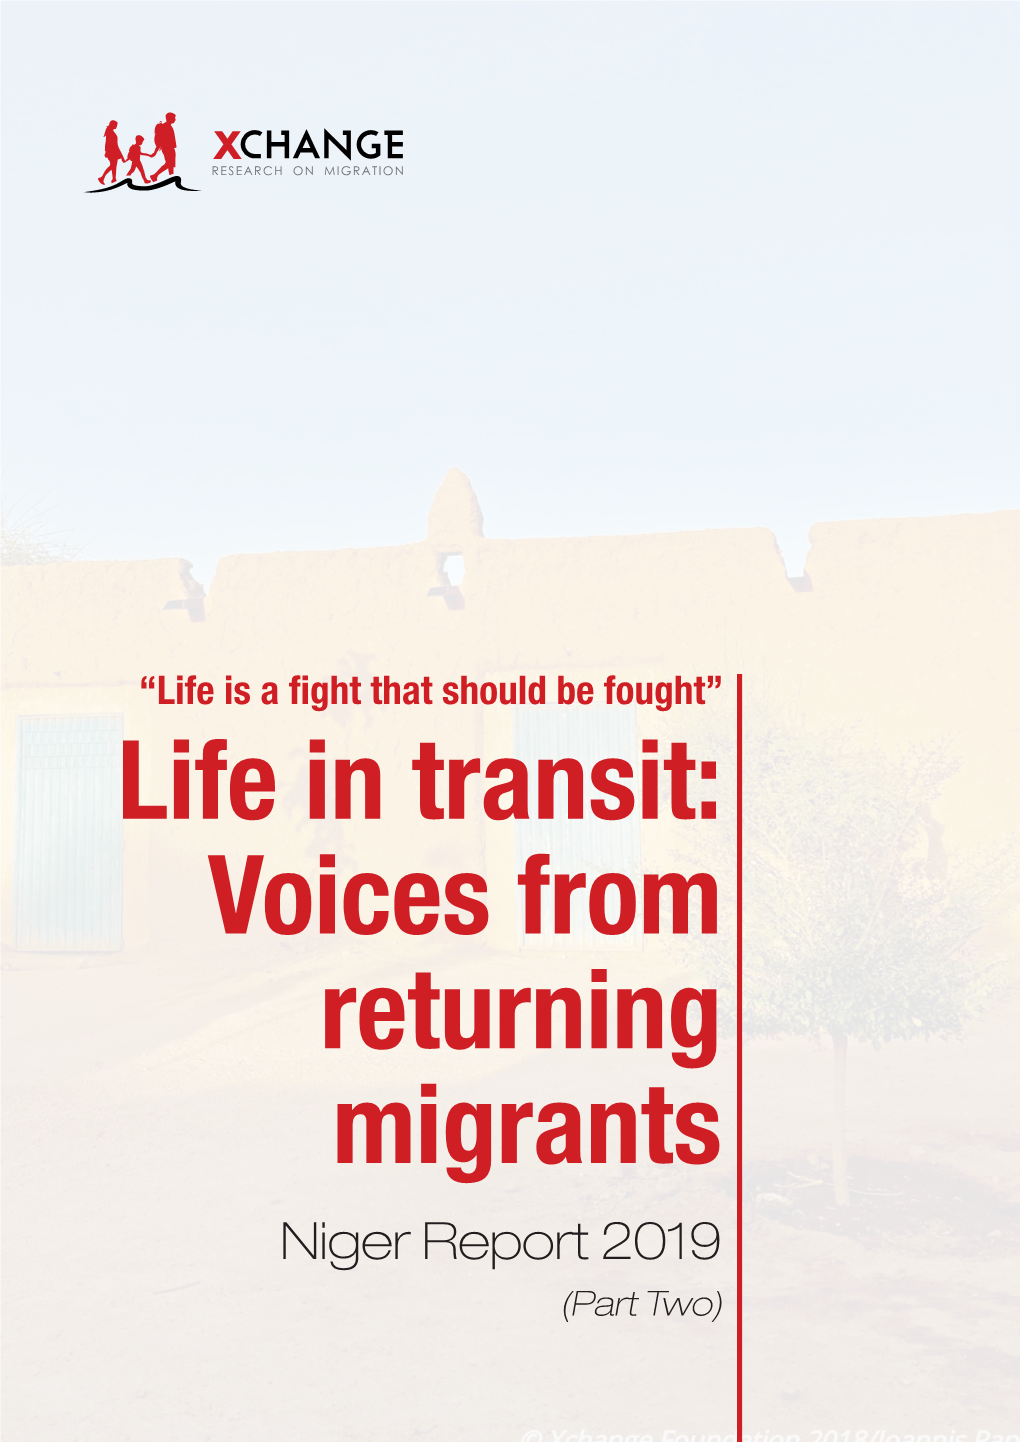 Life in Transit: Voices from Returning Migrants Niger Report 2019 (Part Two) LIFE in TRANSIT: VOICES from RETURNING MIGRANTS NIGER REPORT 2019 (PART TWO)